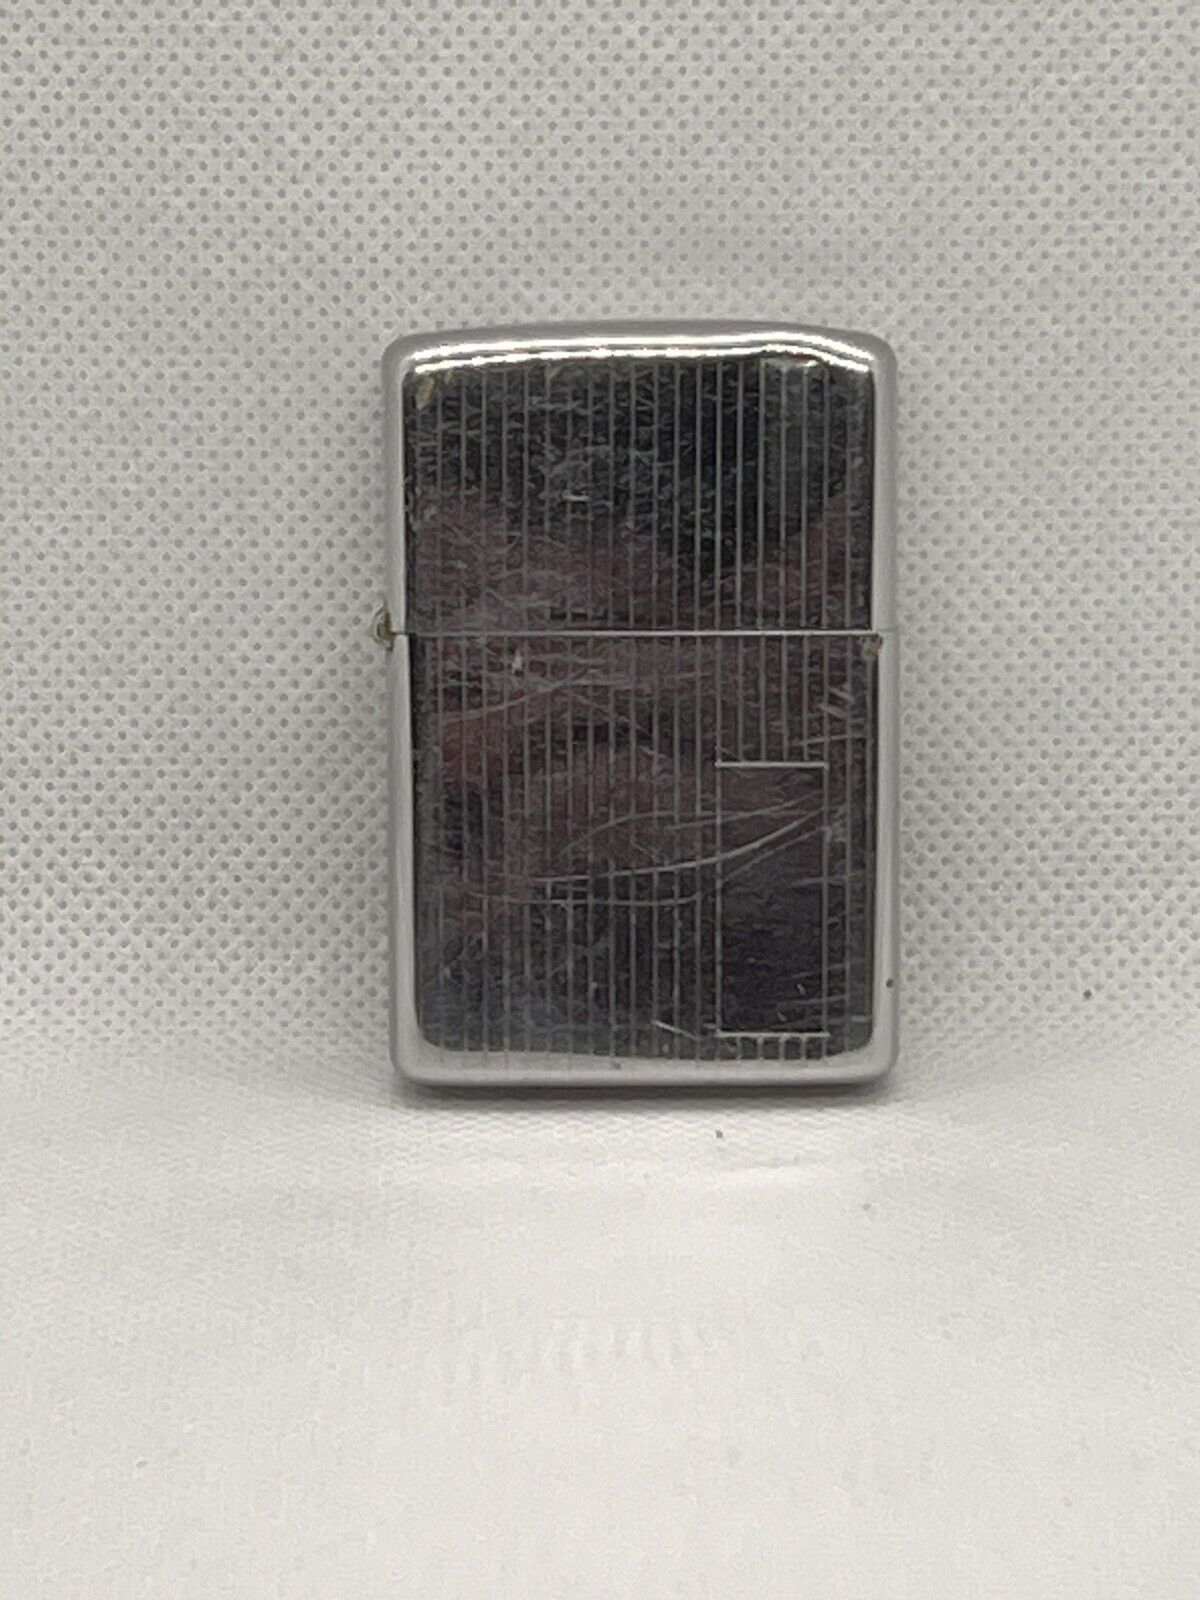 1974 Vintage Zippo Vertical Lines Chrome Lighter That Is In Excellent Condition